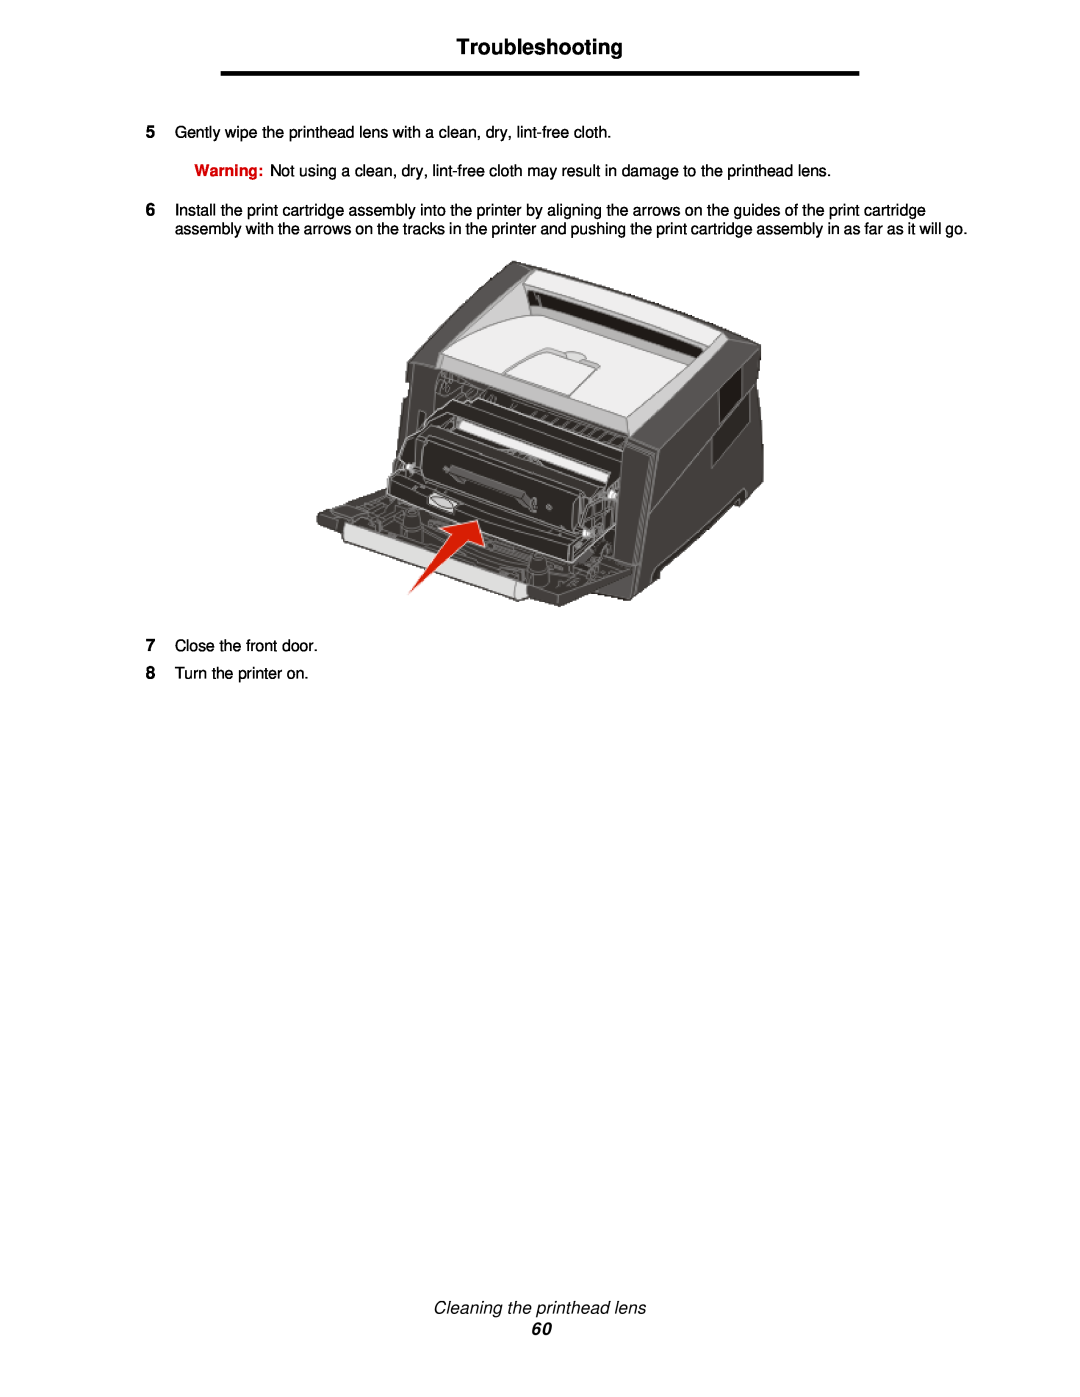 Lexmark 350d manual Troubleshooting, Cleaning the printhead lens 